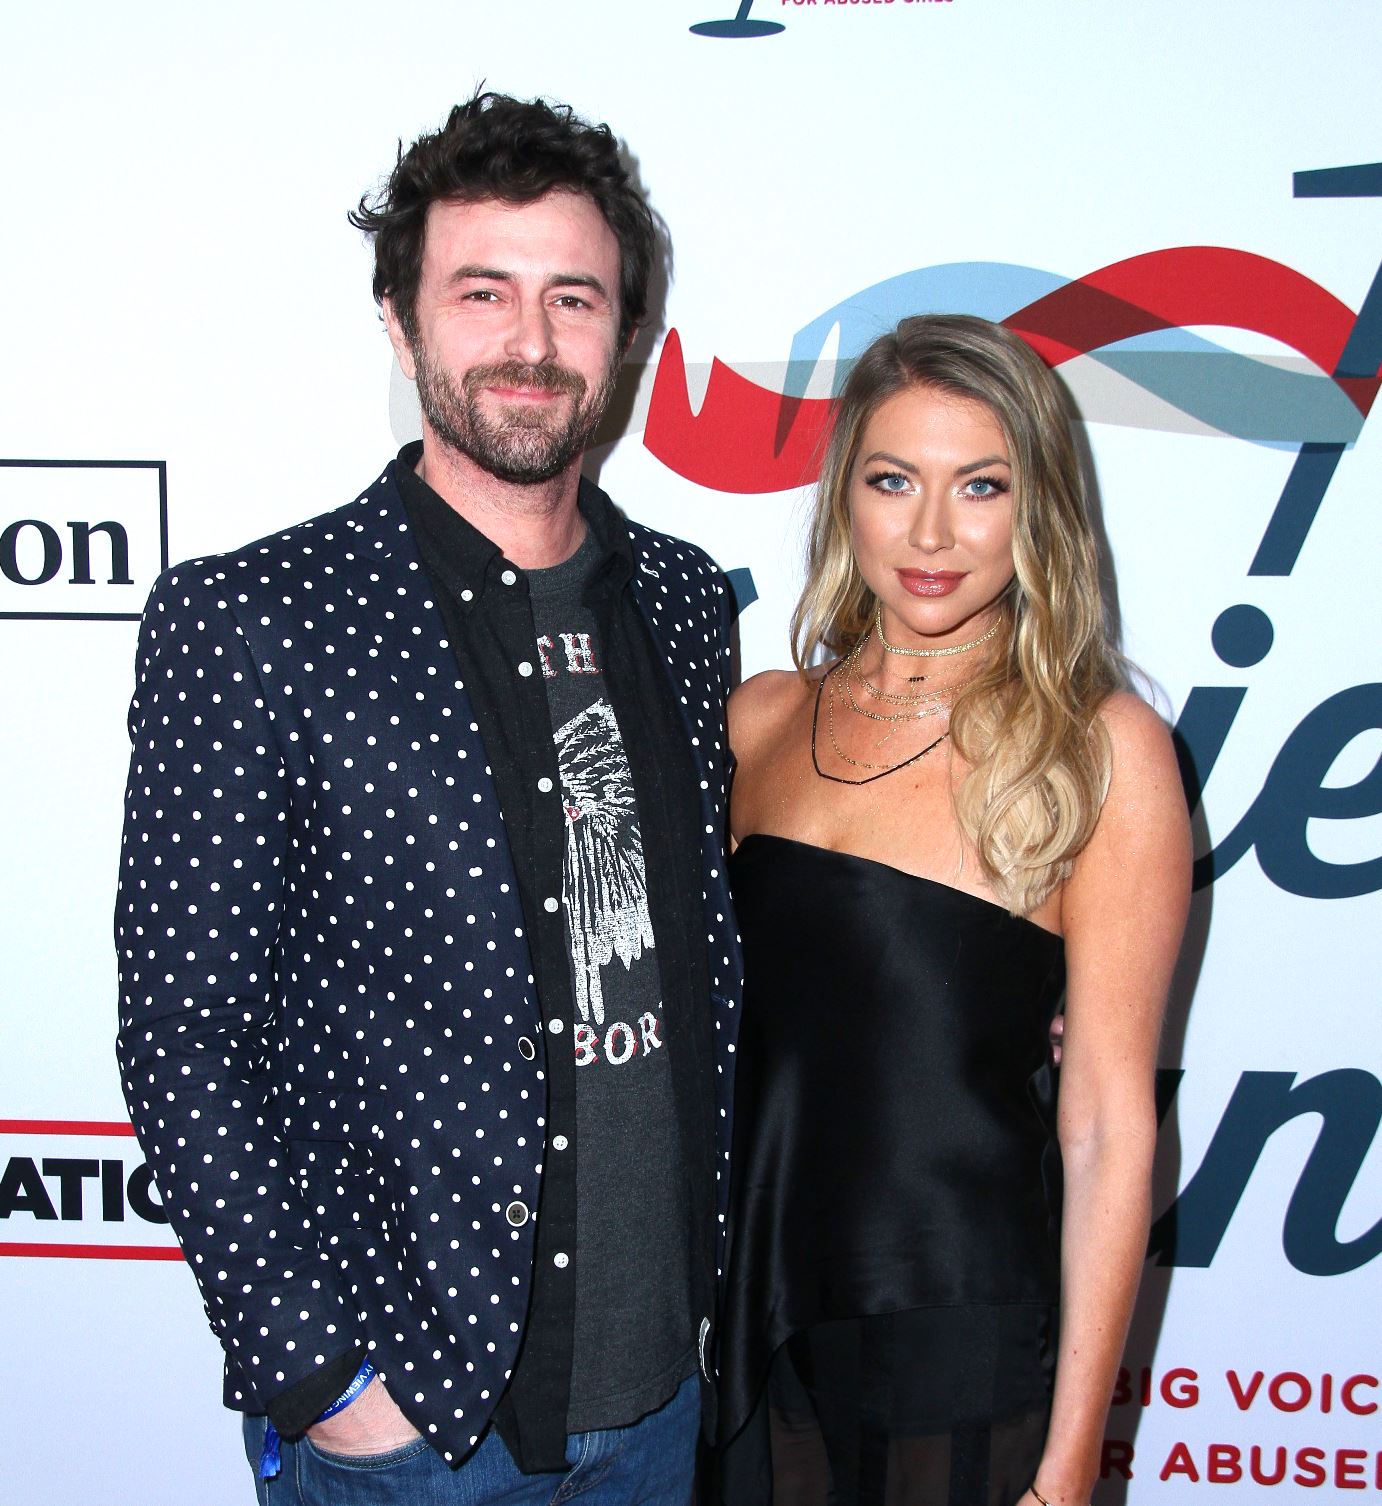 Stassi Schroeder Officially Announces She's Pregnant With Her First Child With Fiance Beau Clark, Find Out When the Fired Vanderpump Rules Star is Due and See What She's Saying About Her "Next Chapter"